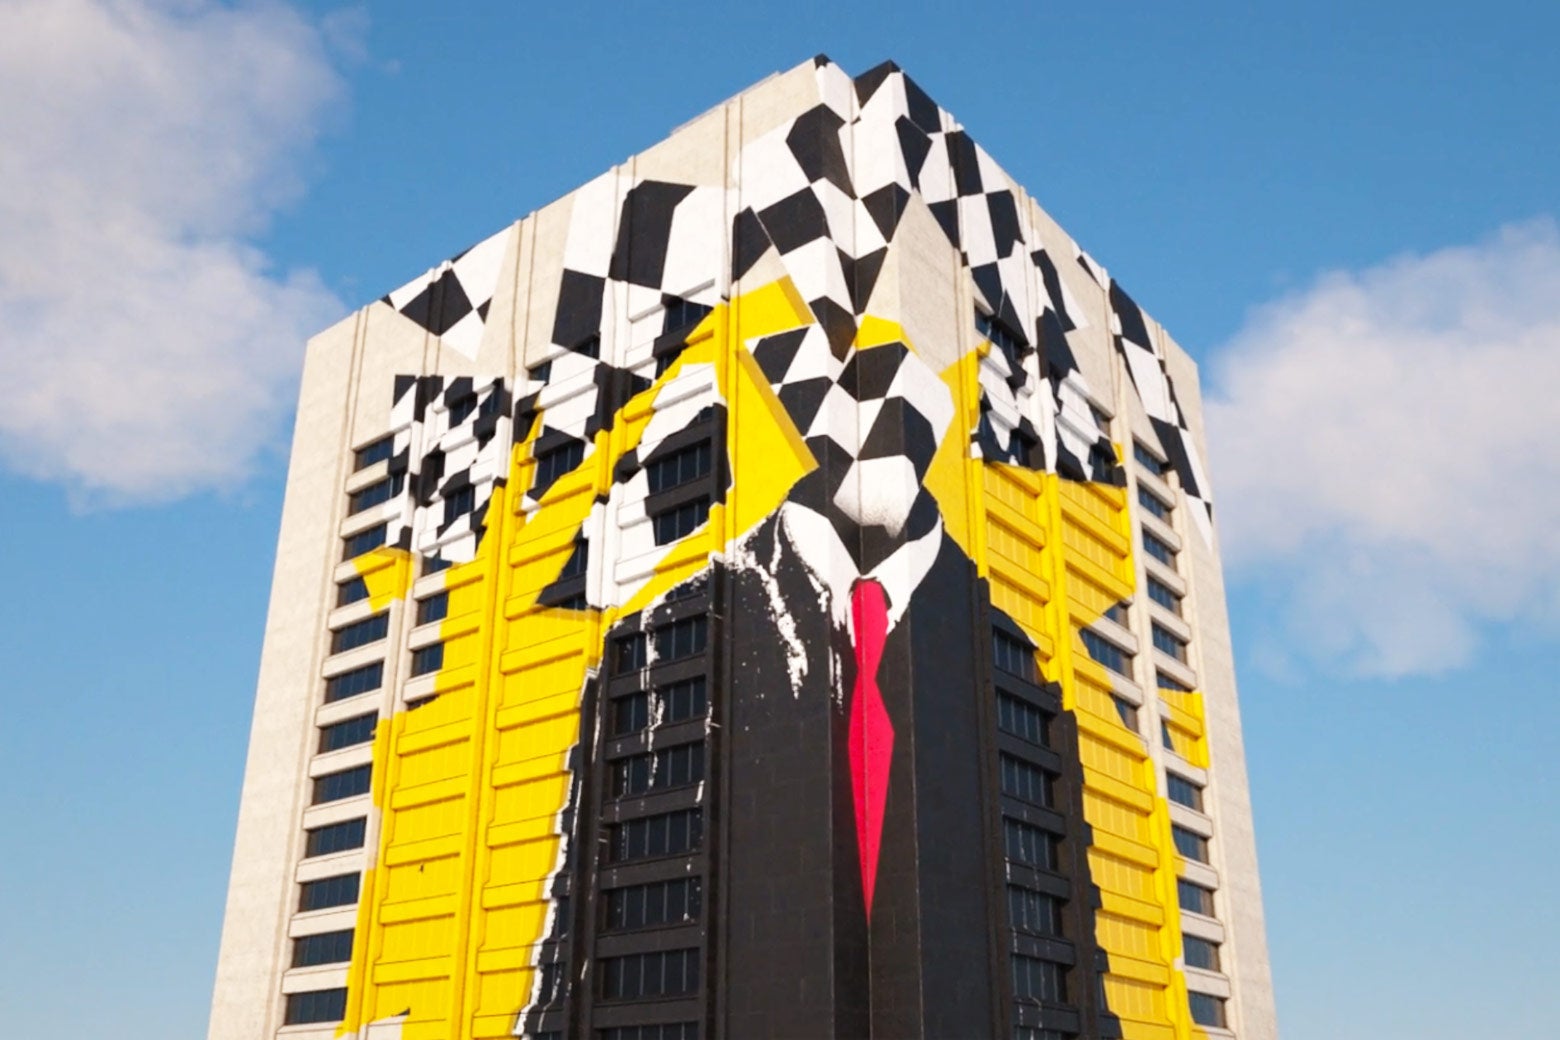 Animation from Season 3, Episode 2 of Serial: "You've Got Some Gauls." It's a slow pan up a building that depicts a large mural of a male judge offset by checker pattern and yellow paint.